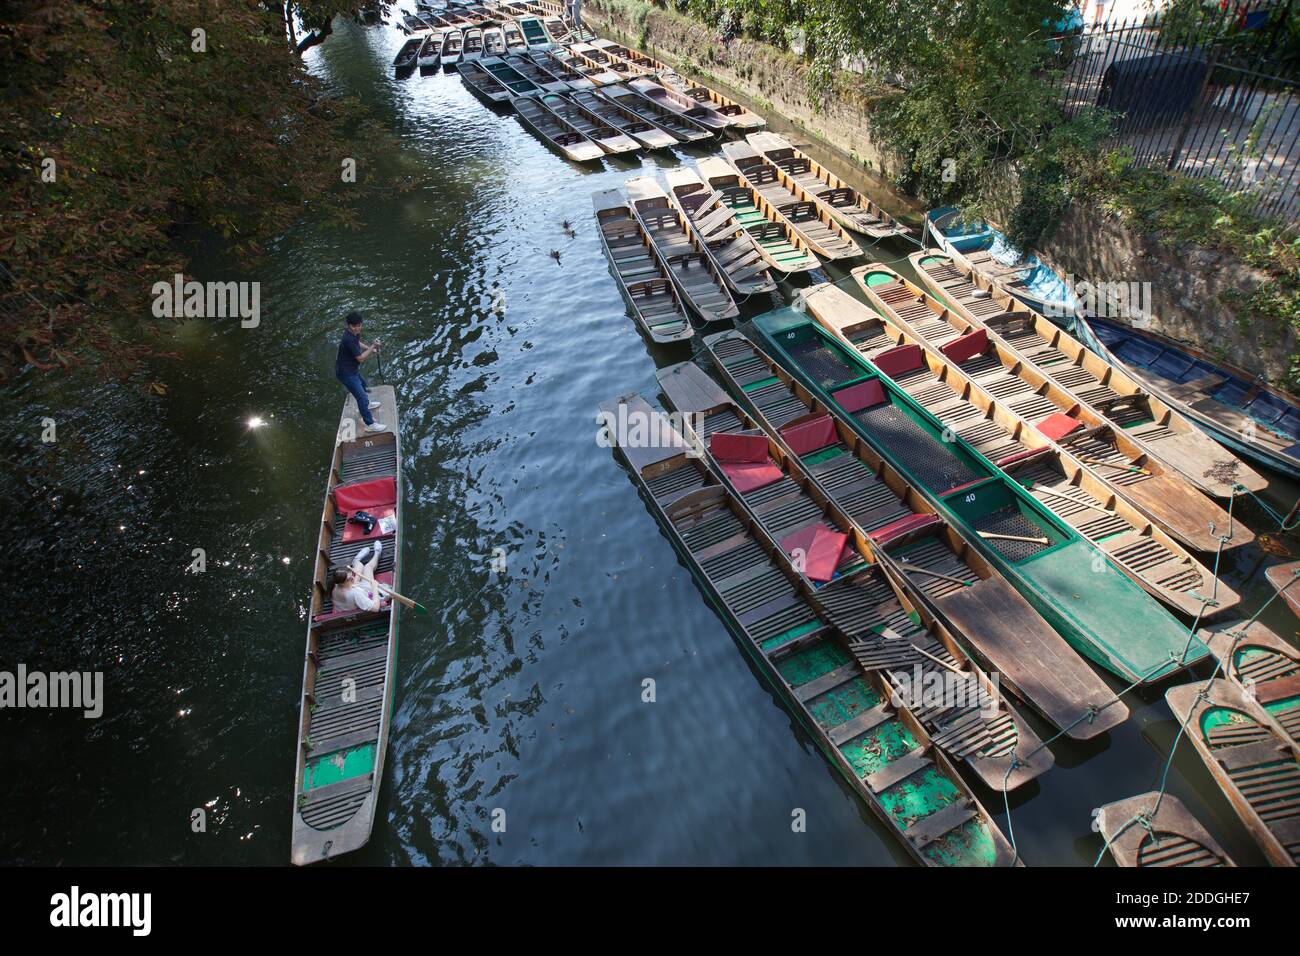 People punting on the River Cherwell in Oxford in the United Kingdom, taken on the 15th of September 2020 Stock Photo